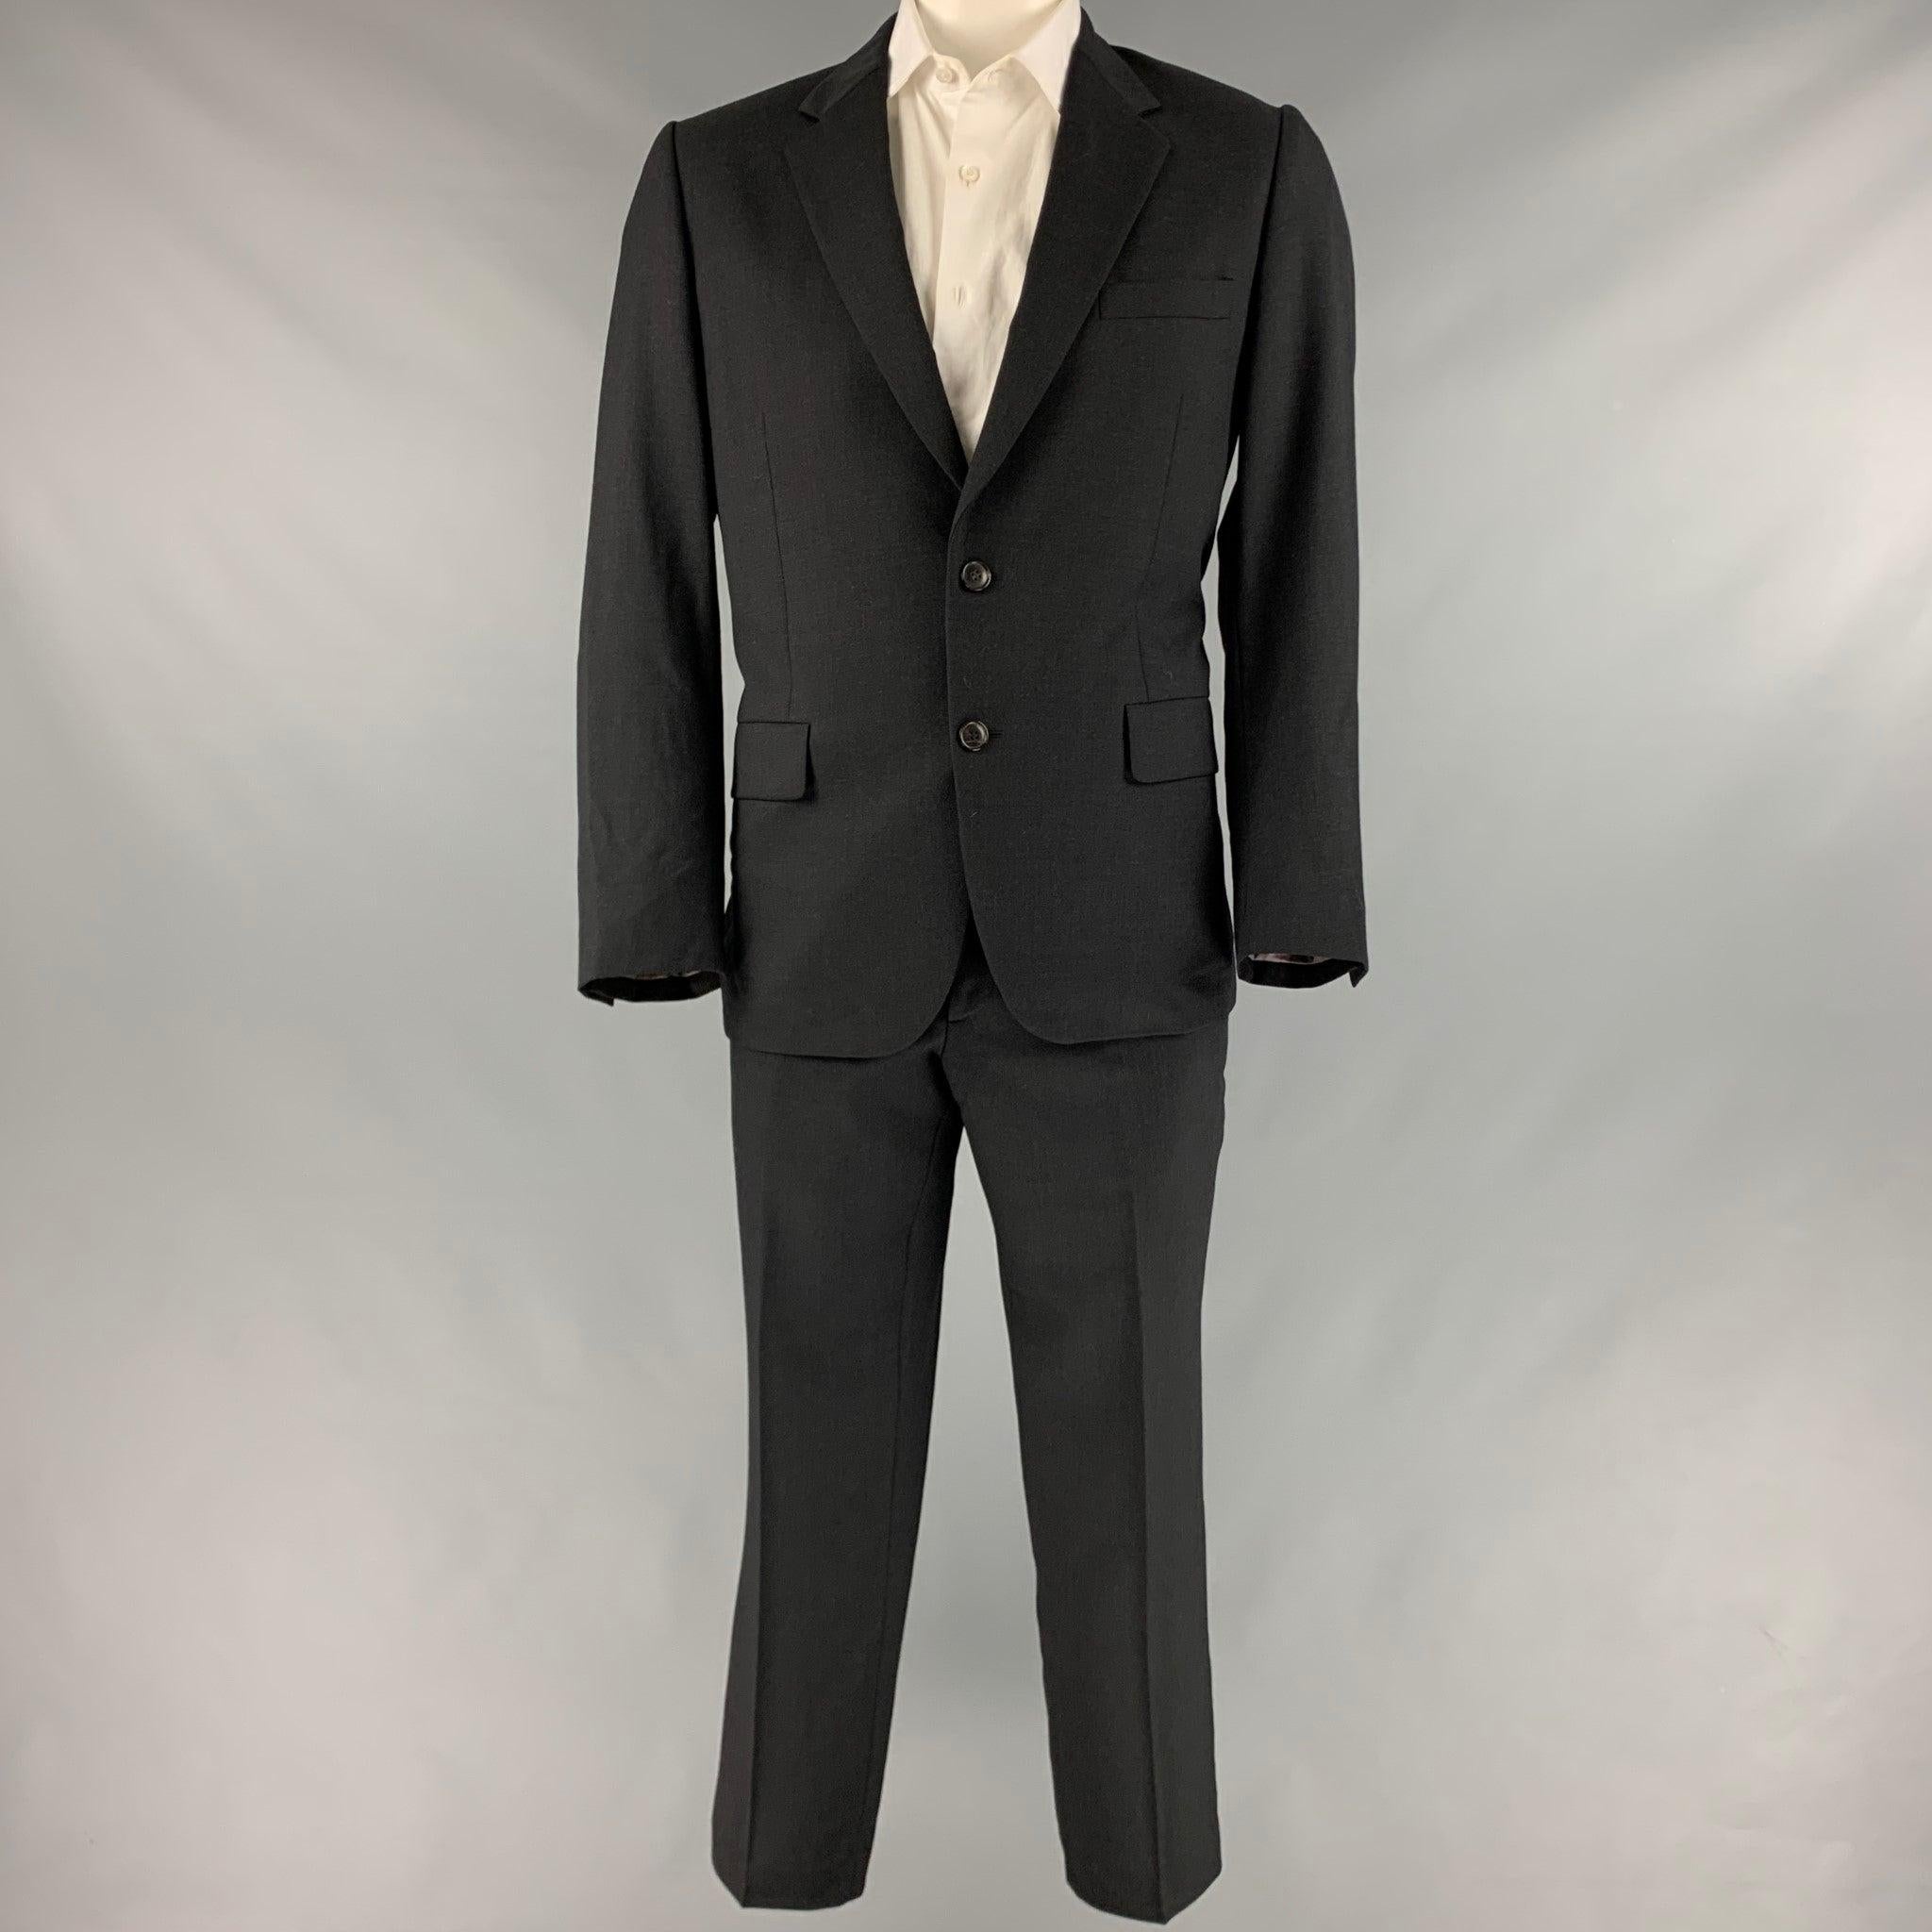 PAUL SMITH suit
in a black wool with a full liner and includes a single breasted, double button sport coat with notch lapel and matching flat front trousers. Made in Italy.Very Good Pre-Owned Condition.
Minor signs of wear. 

Marked:   42R